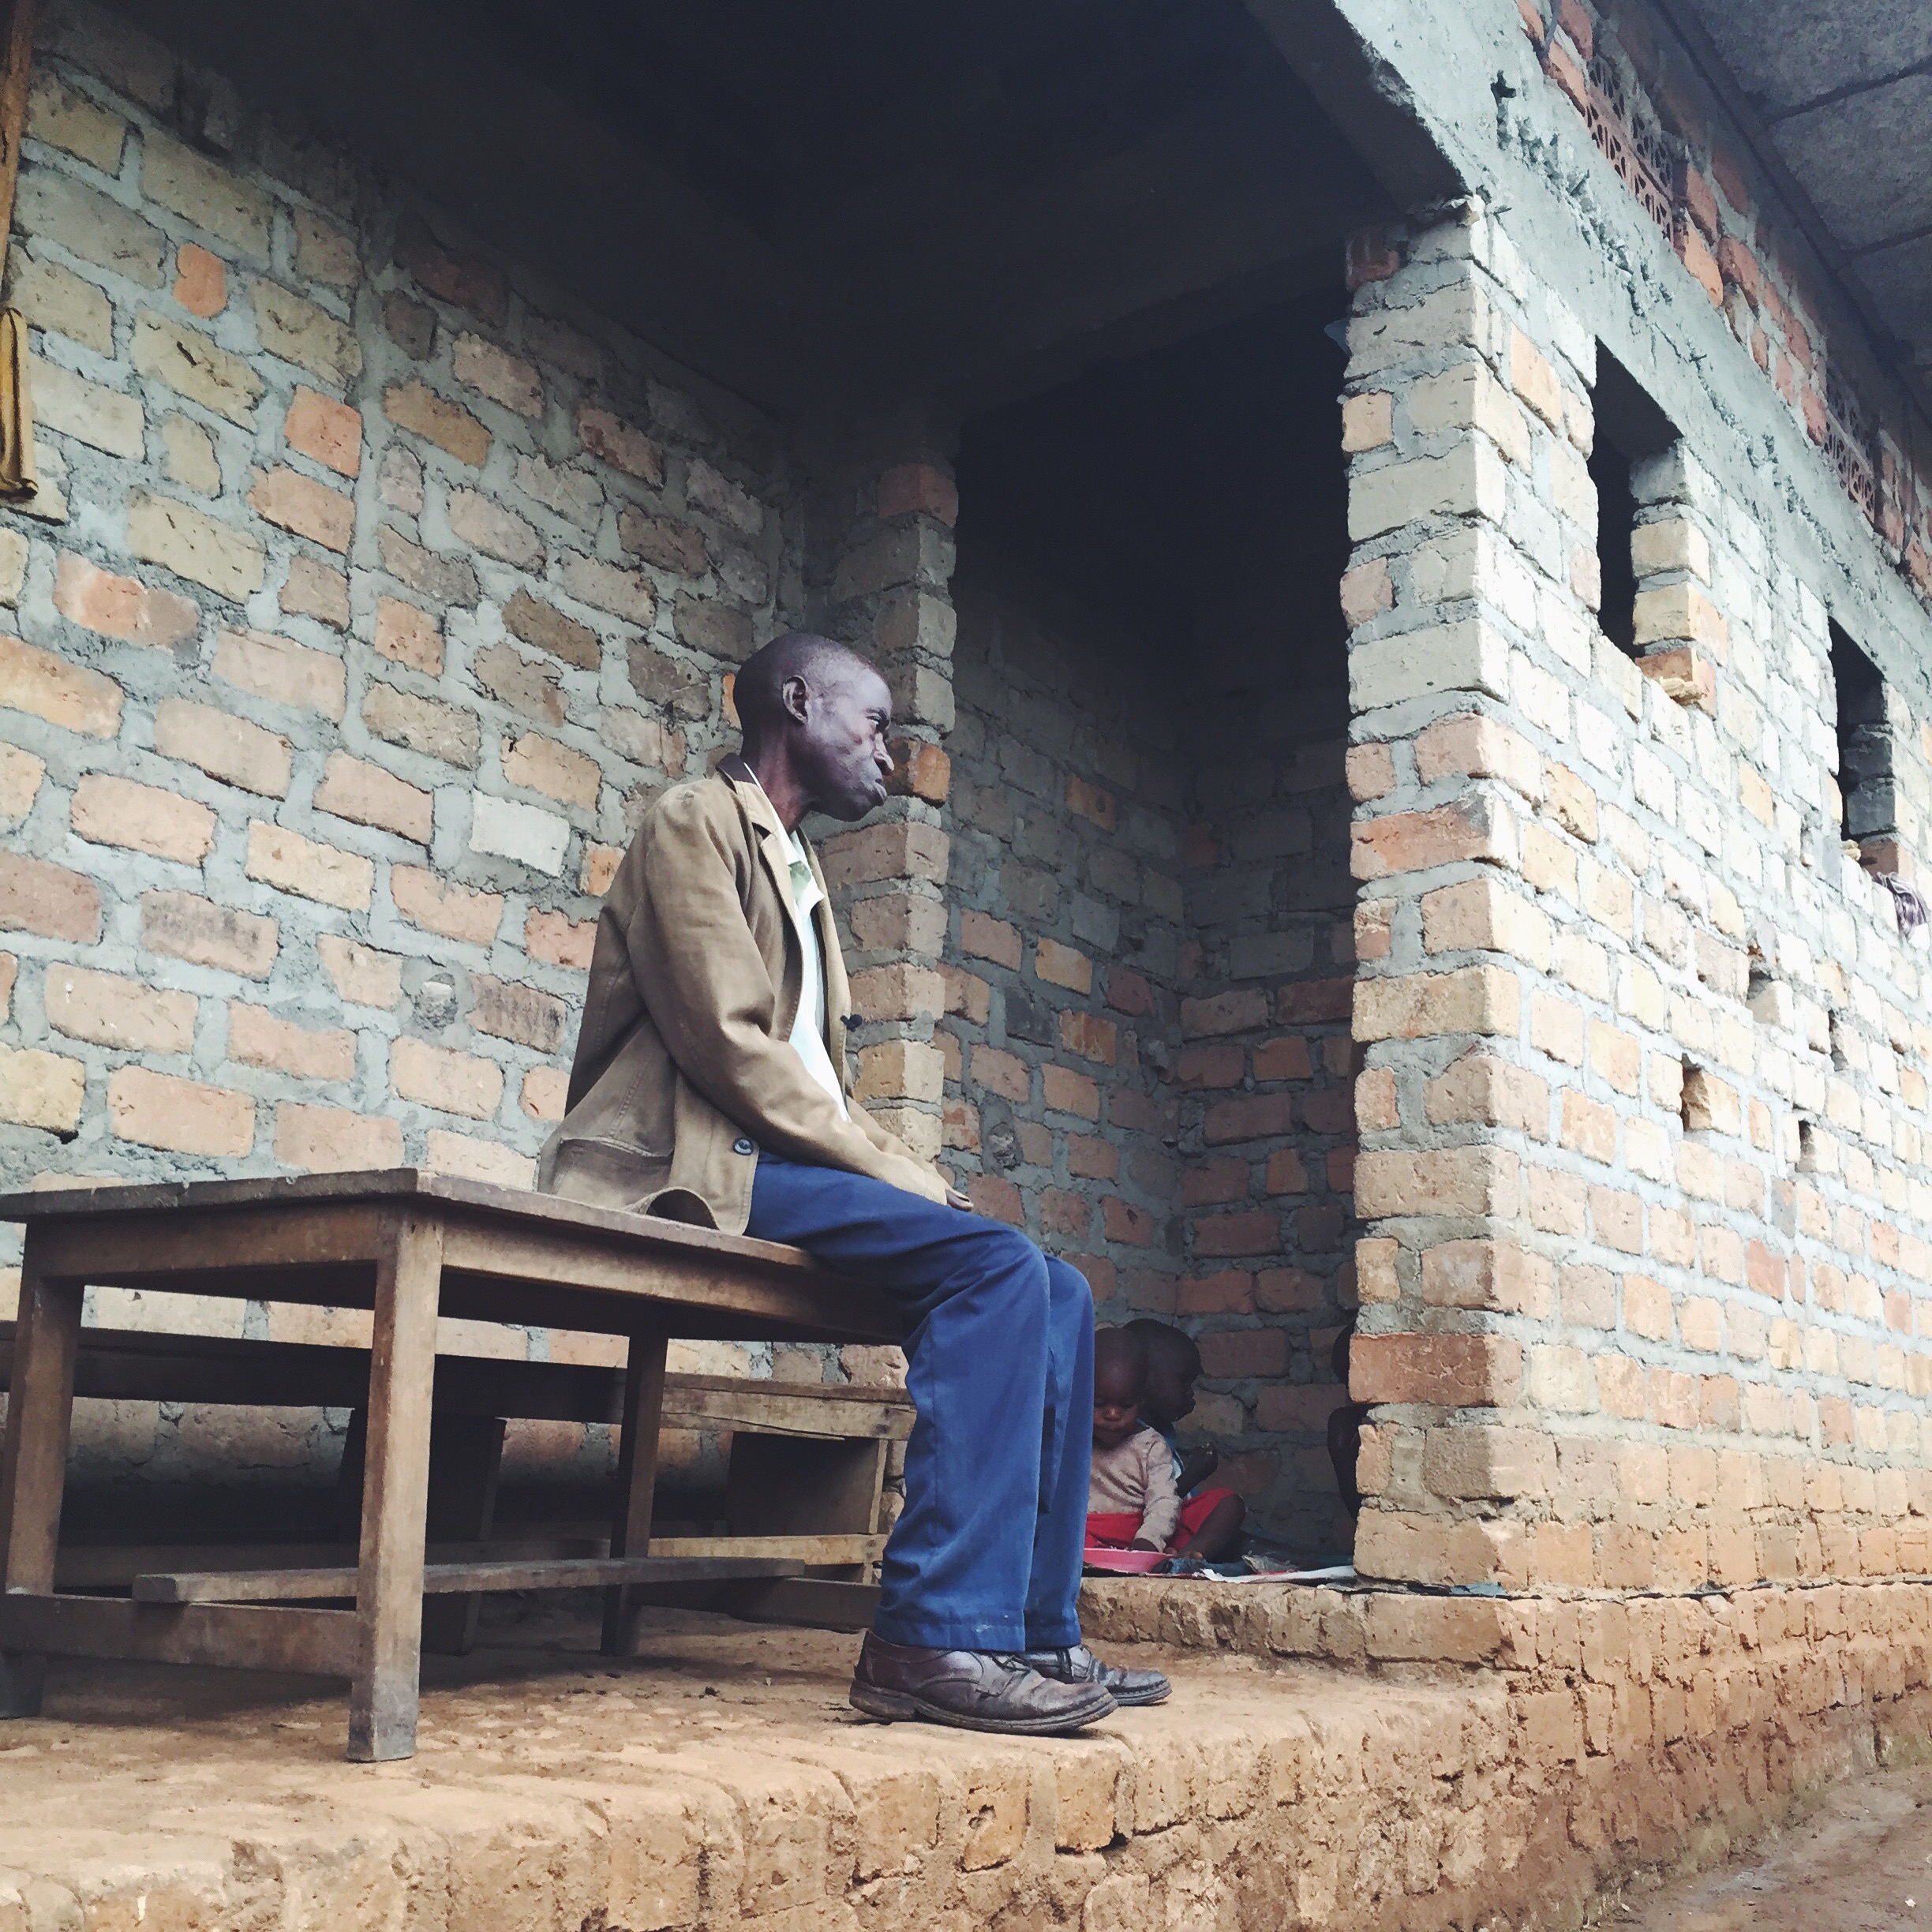  UGANDA: [Home Visit] Mr. Sentongo takes care of his 3 grandchildren living in an abandoned building. His daughter is on the streets and doesnt take care of them so he does. Mr. S was another instant hero. I wrote about him later that day on an insta